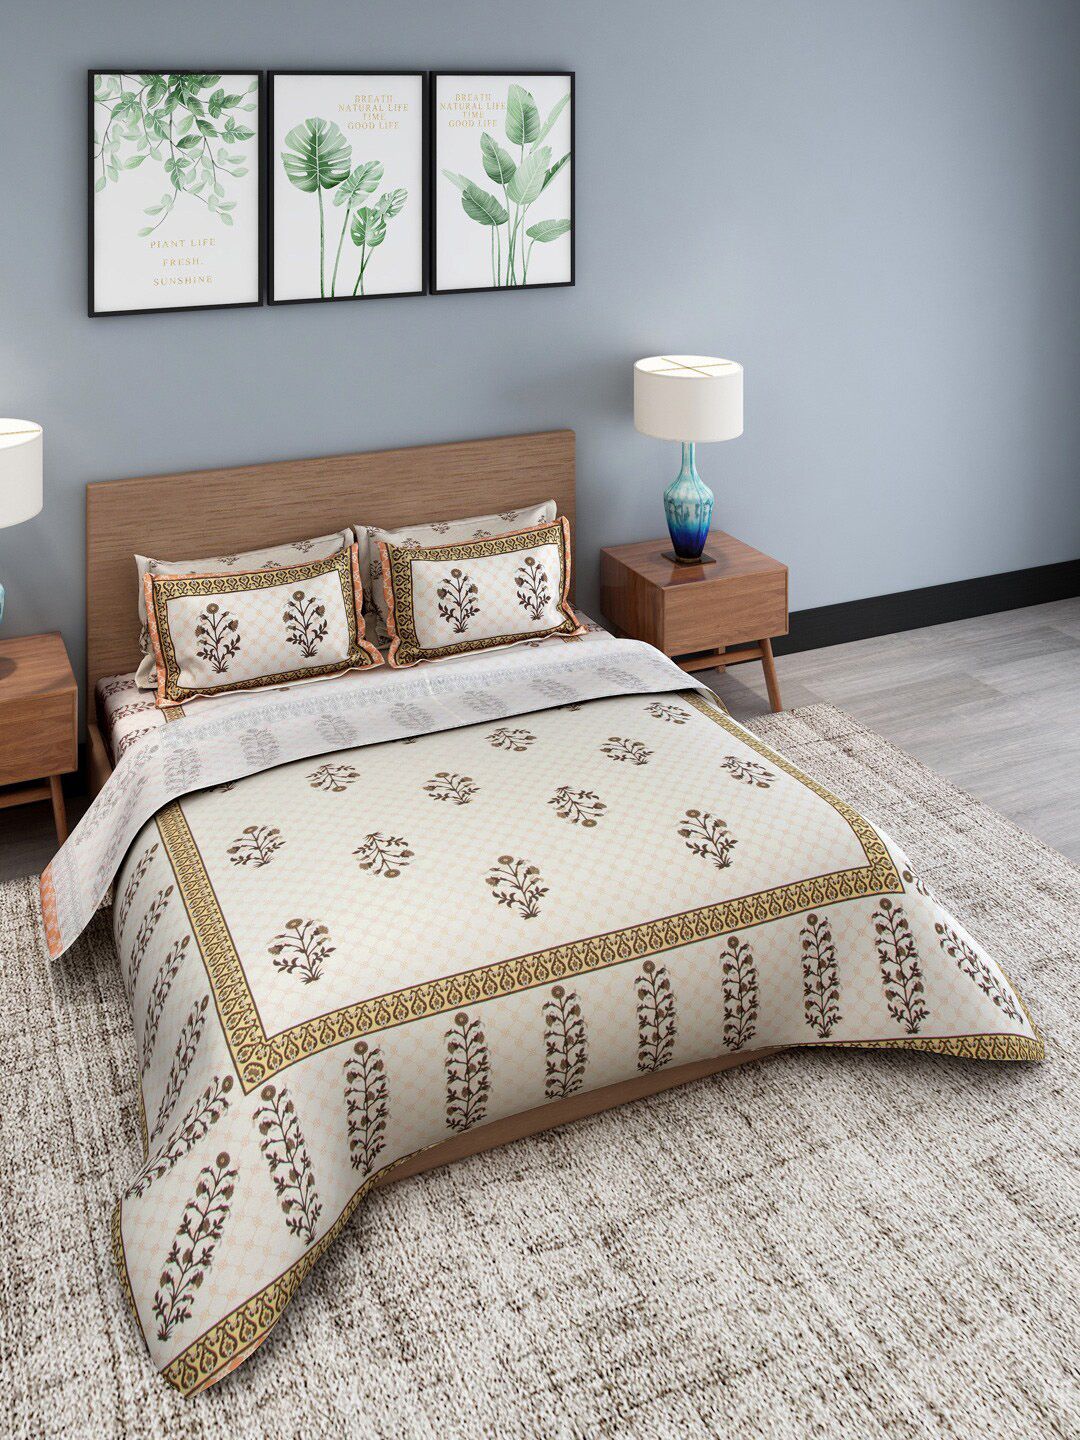 Rajasthan Decor Set Of 4 Beige & Brown Printed Cotton Double Bedding Set With Pillow Covers & Comforter Price in India